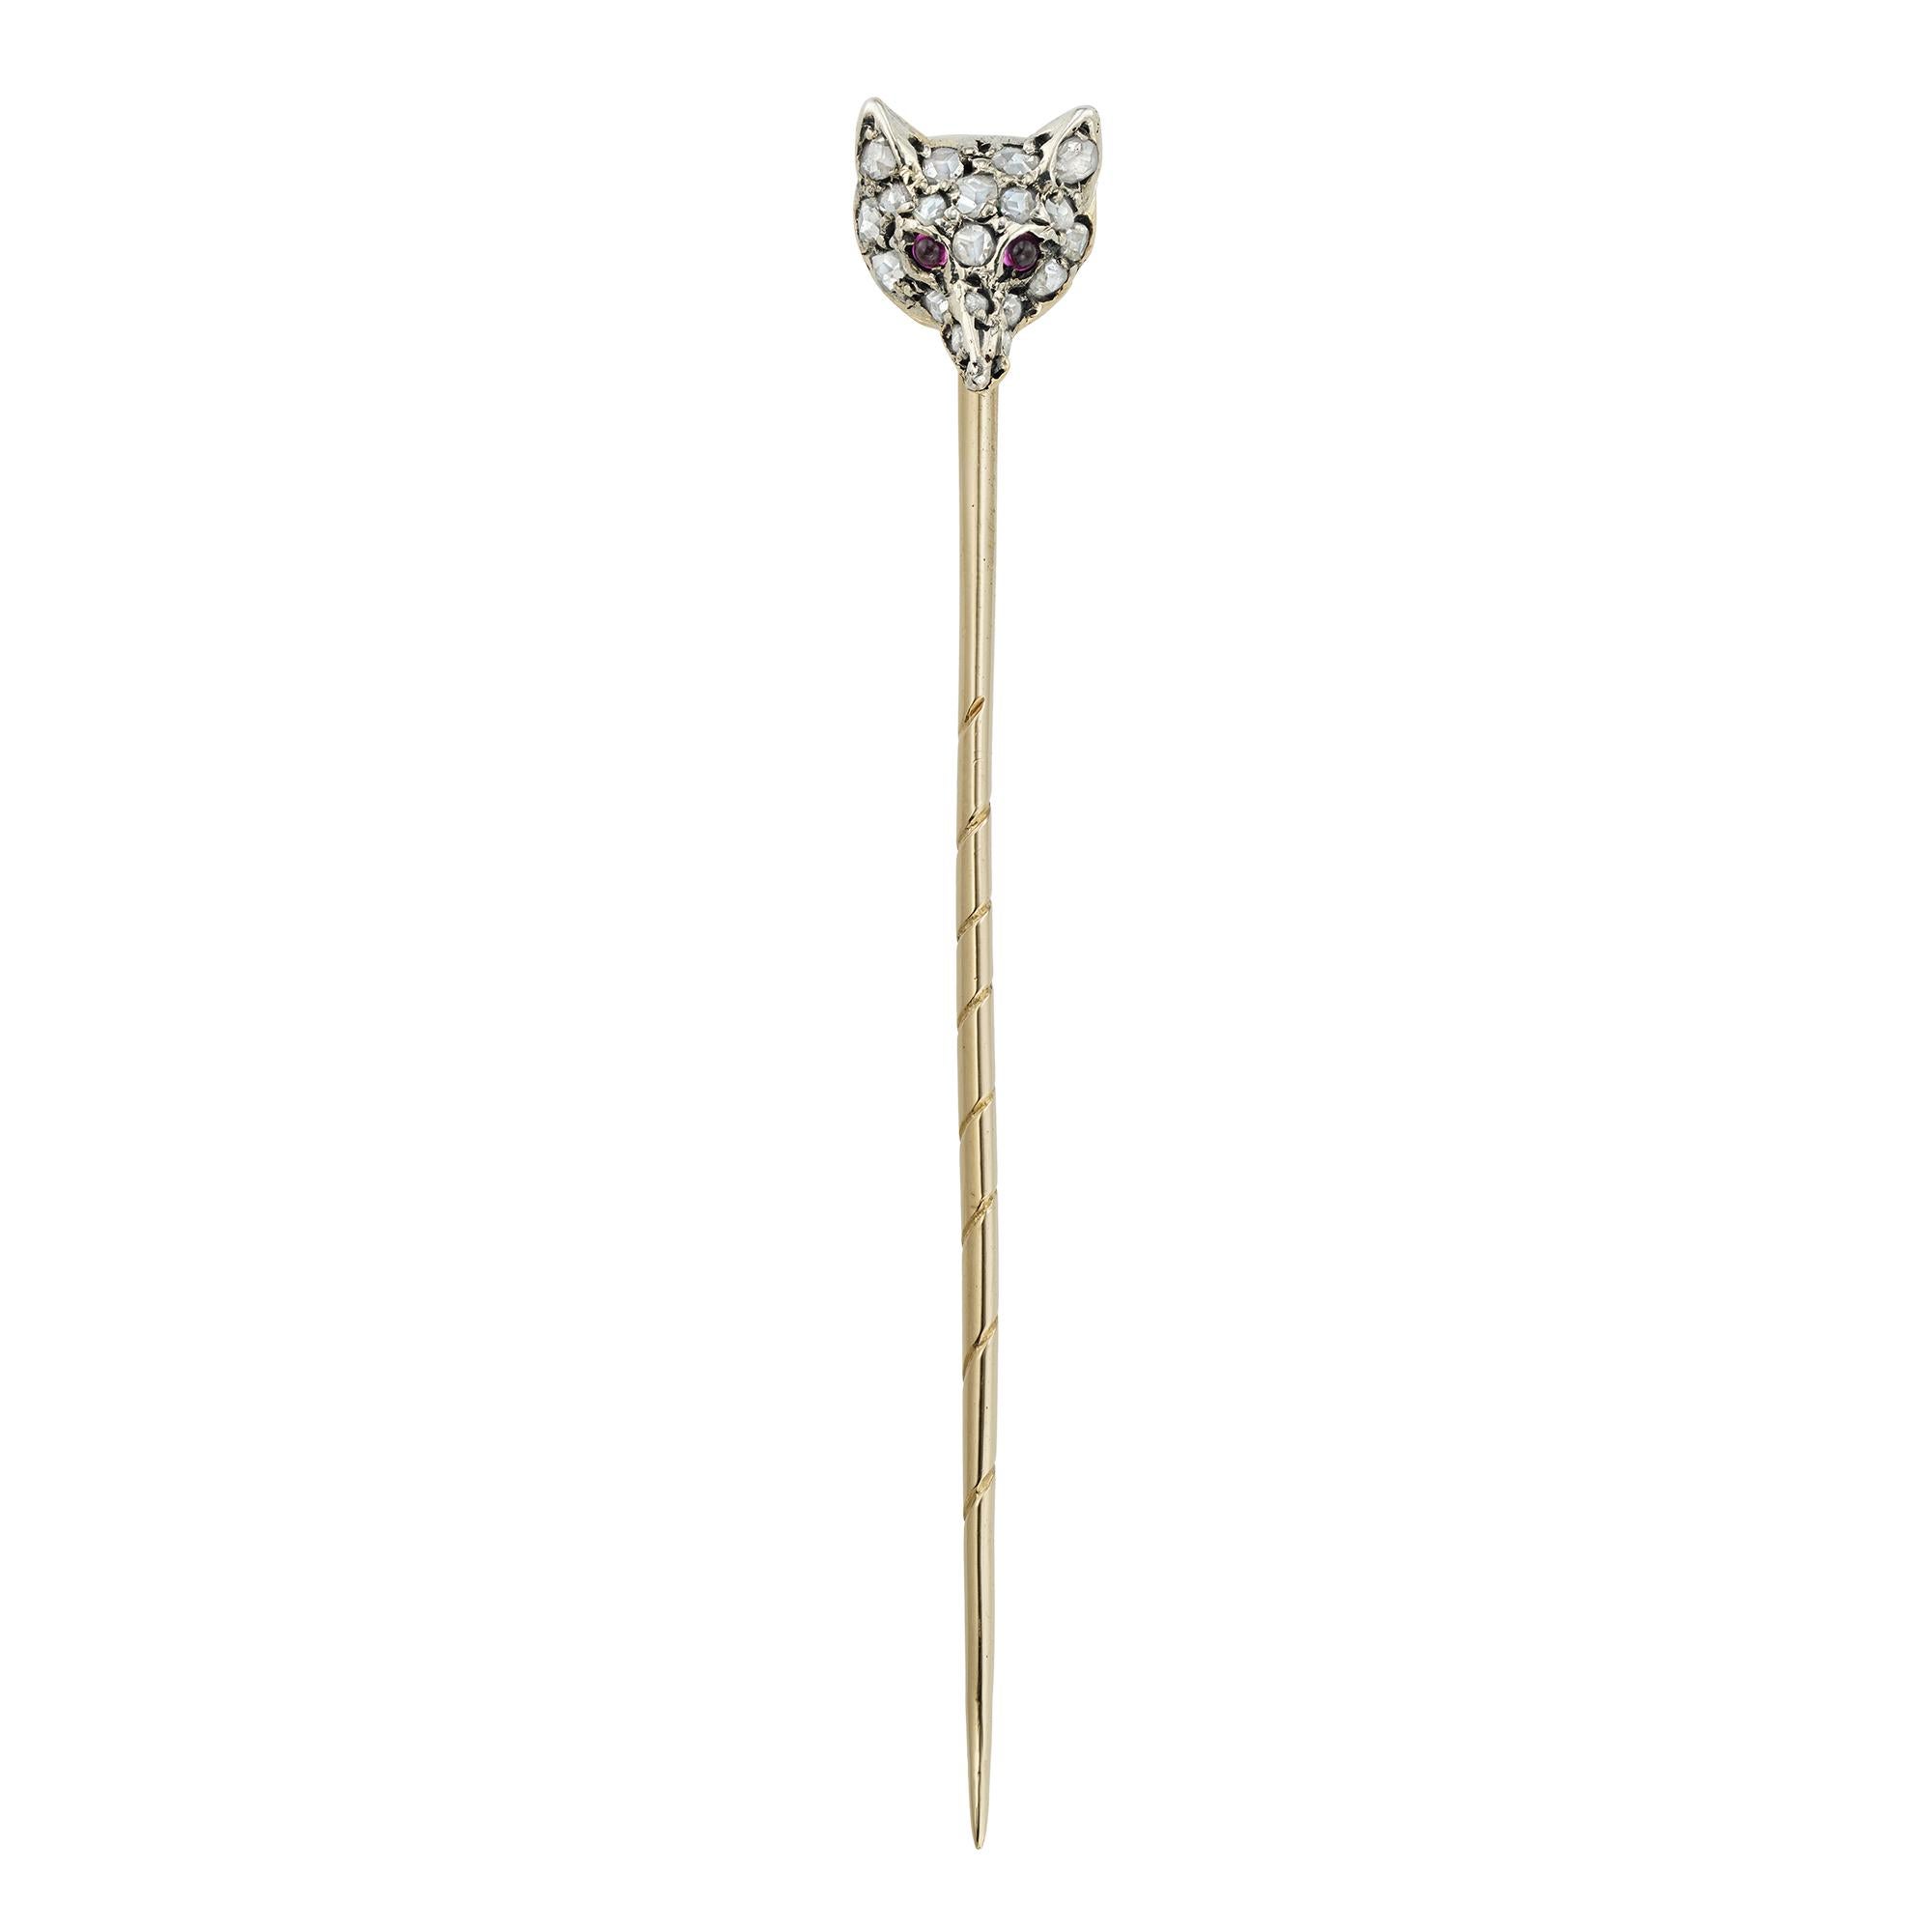 A late Victorian fox-head stickpin, set with nineteen rose-cut diamonds and two cabochon-cut ruby-set eye, mounted in silver to yellow gold, with gold pin fitting, circa 1890, measuring 0.8 x 0.7cm, the pin measuring 5cm long, gross weight 1.6